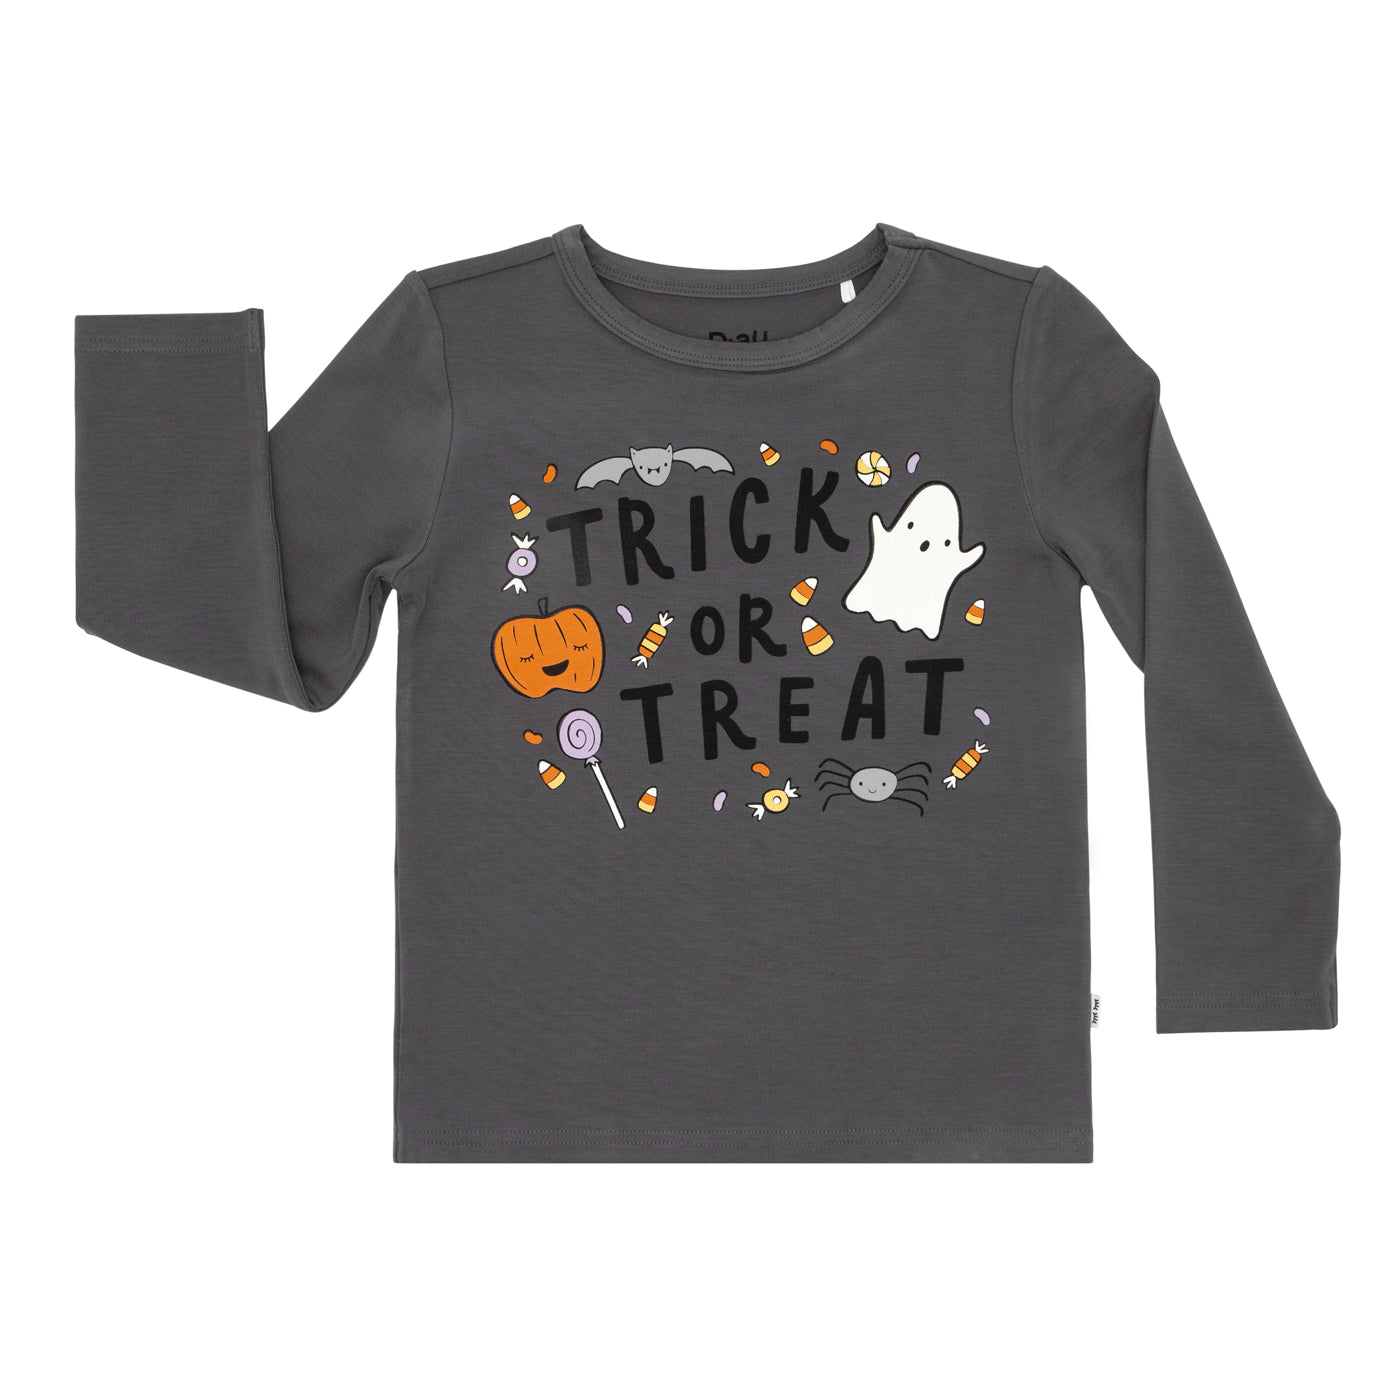 Flat lay image of a Trick or Treat graphic tee